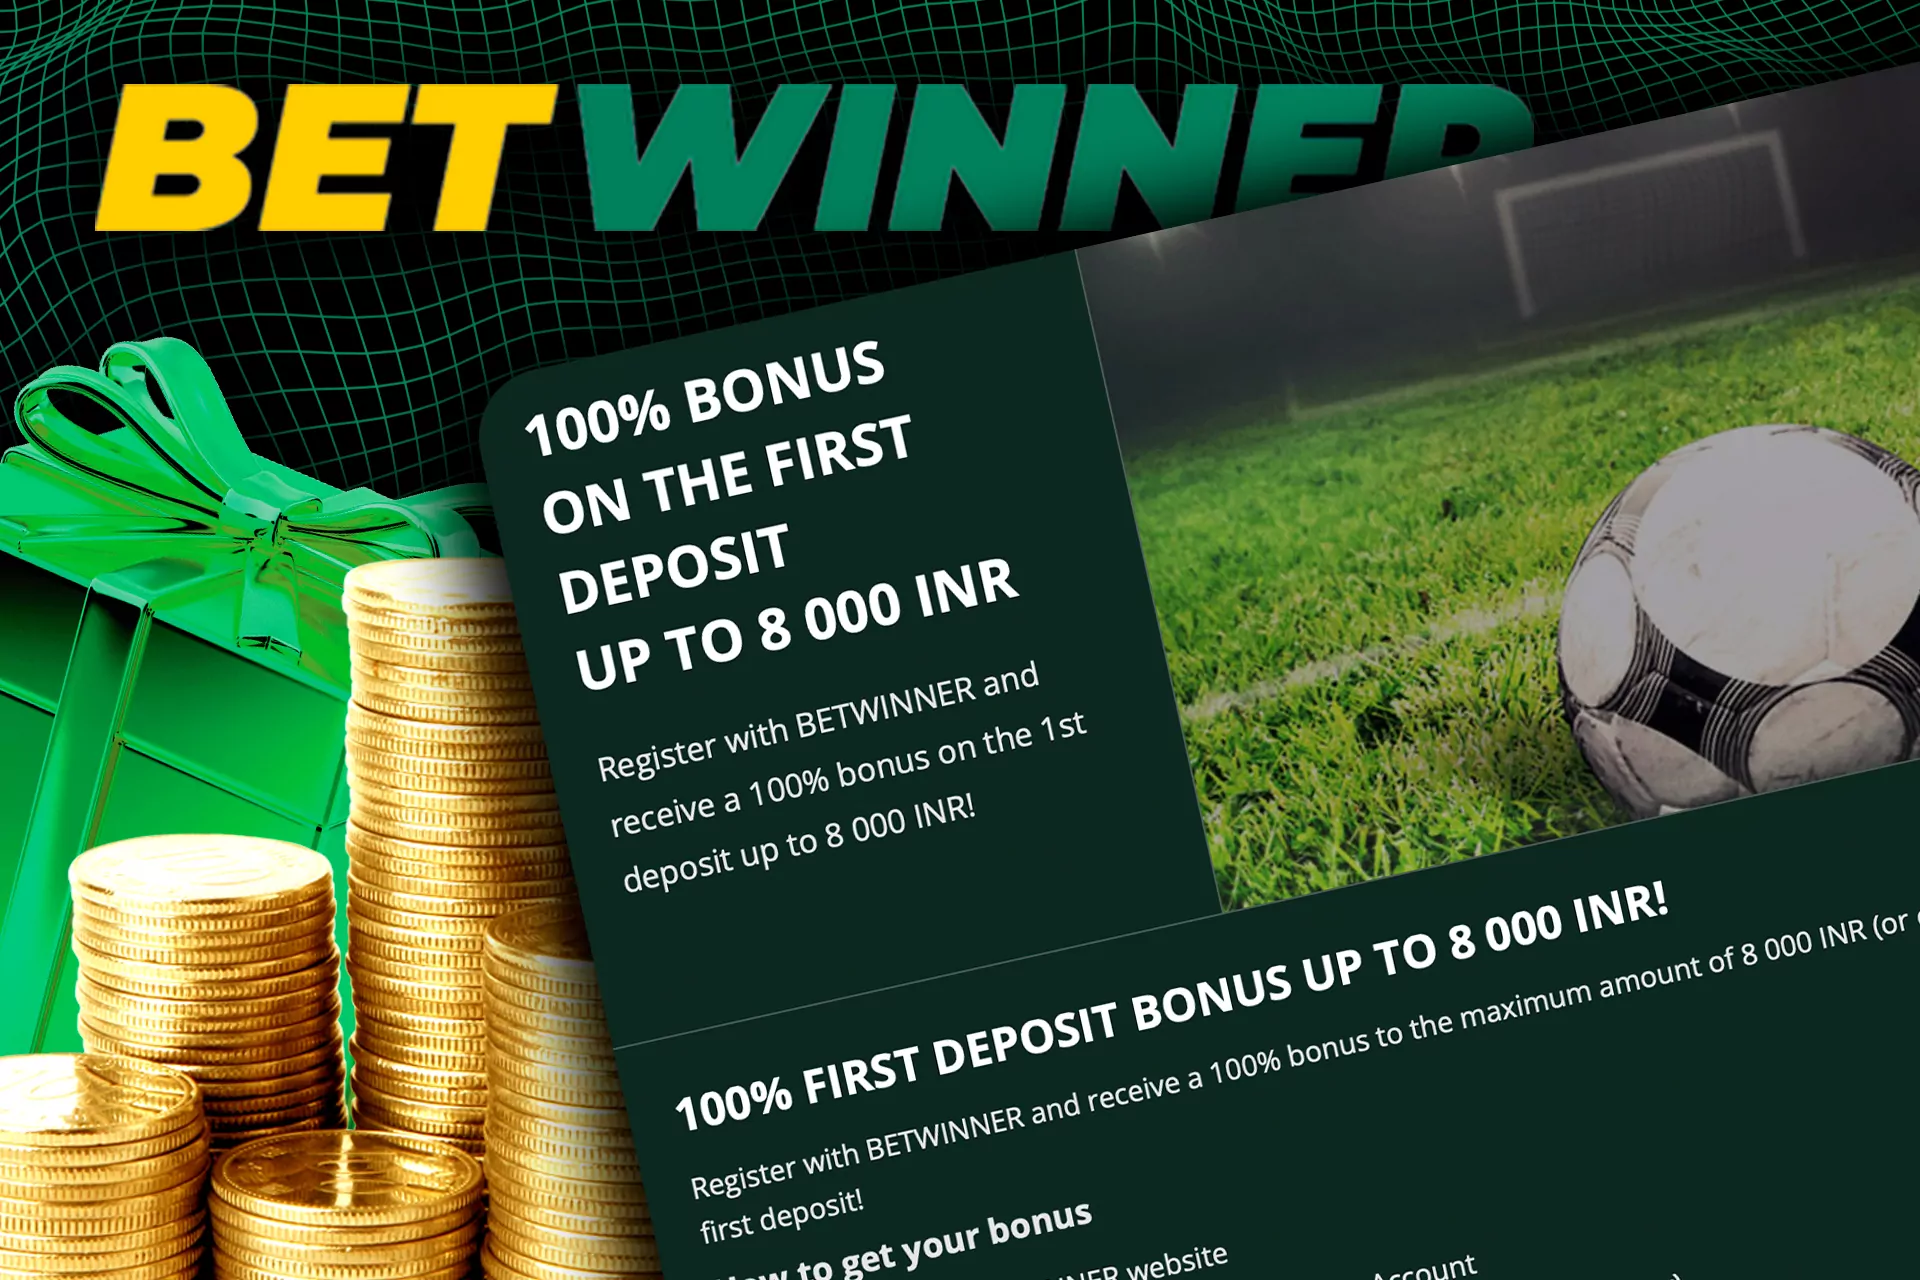 New users can claim a welcome bonus on betting from Betwinner.